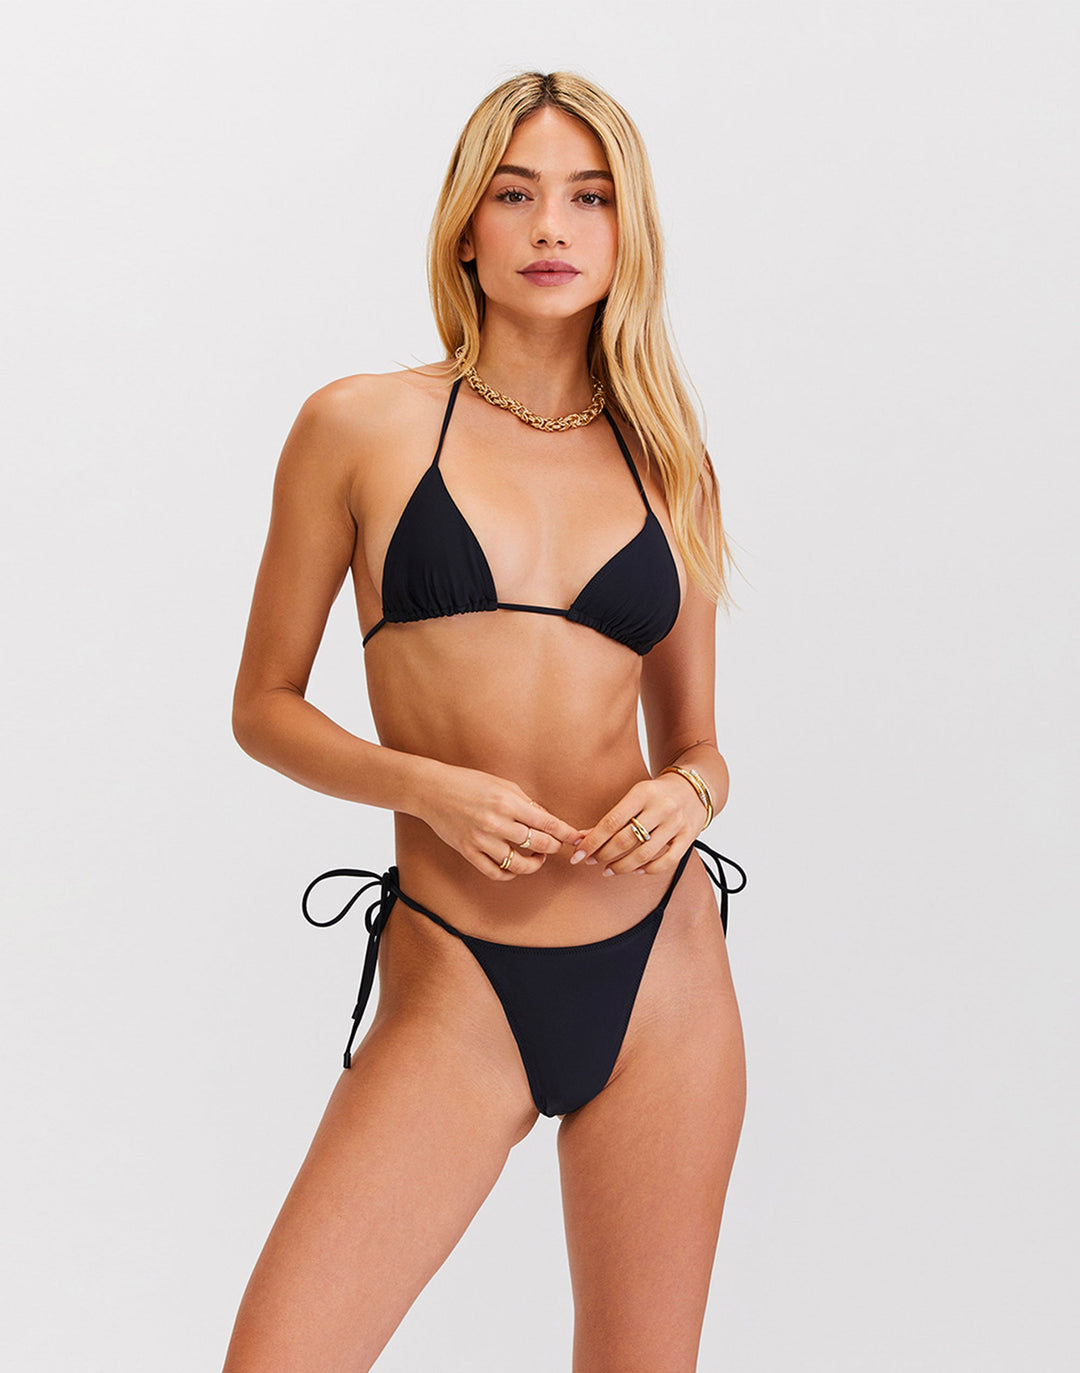 Le Triangle Top - Jet Black by Sunkissed